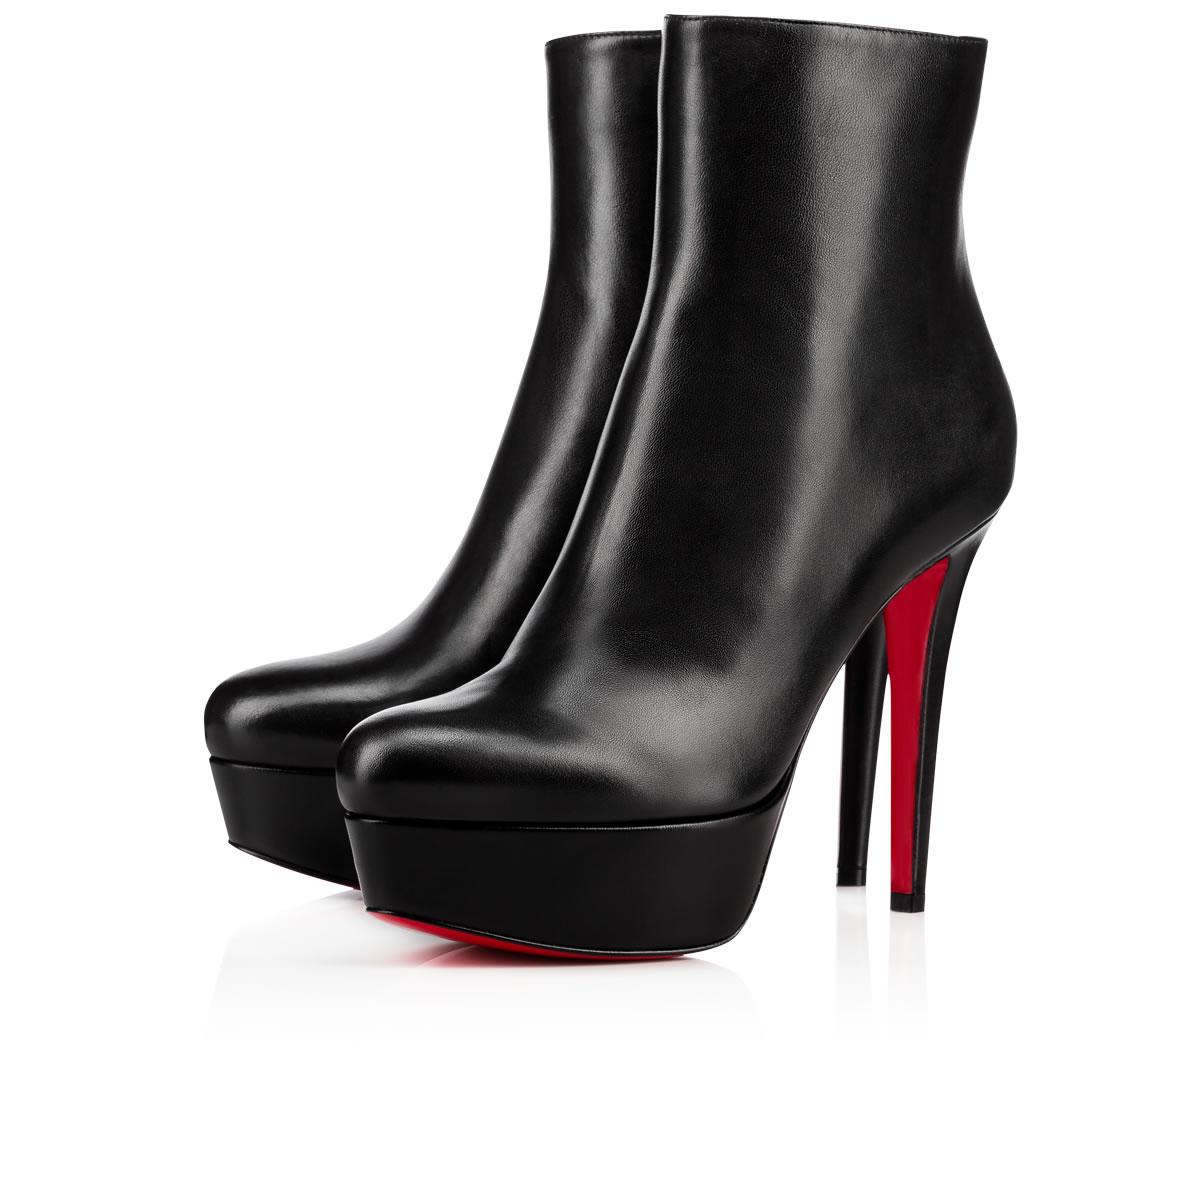 Booty - 119 Ankle boots - Nappa - Black - Louboutin